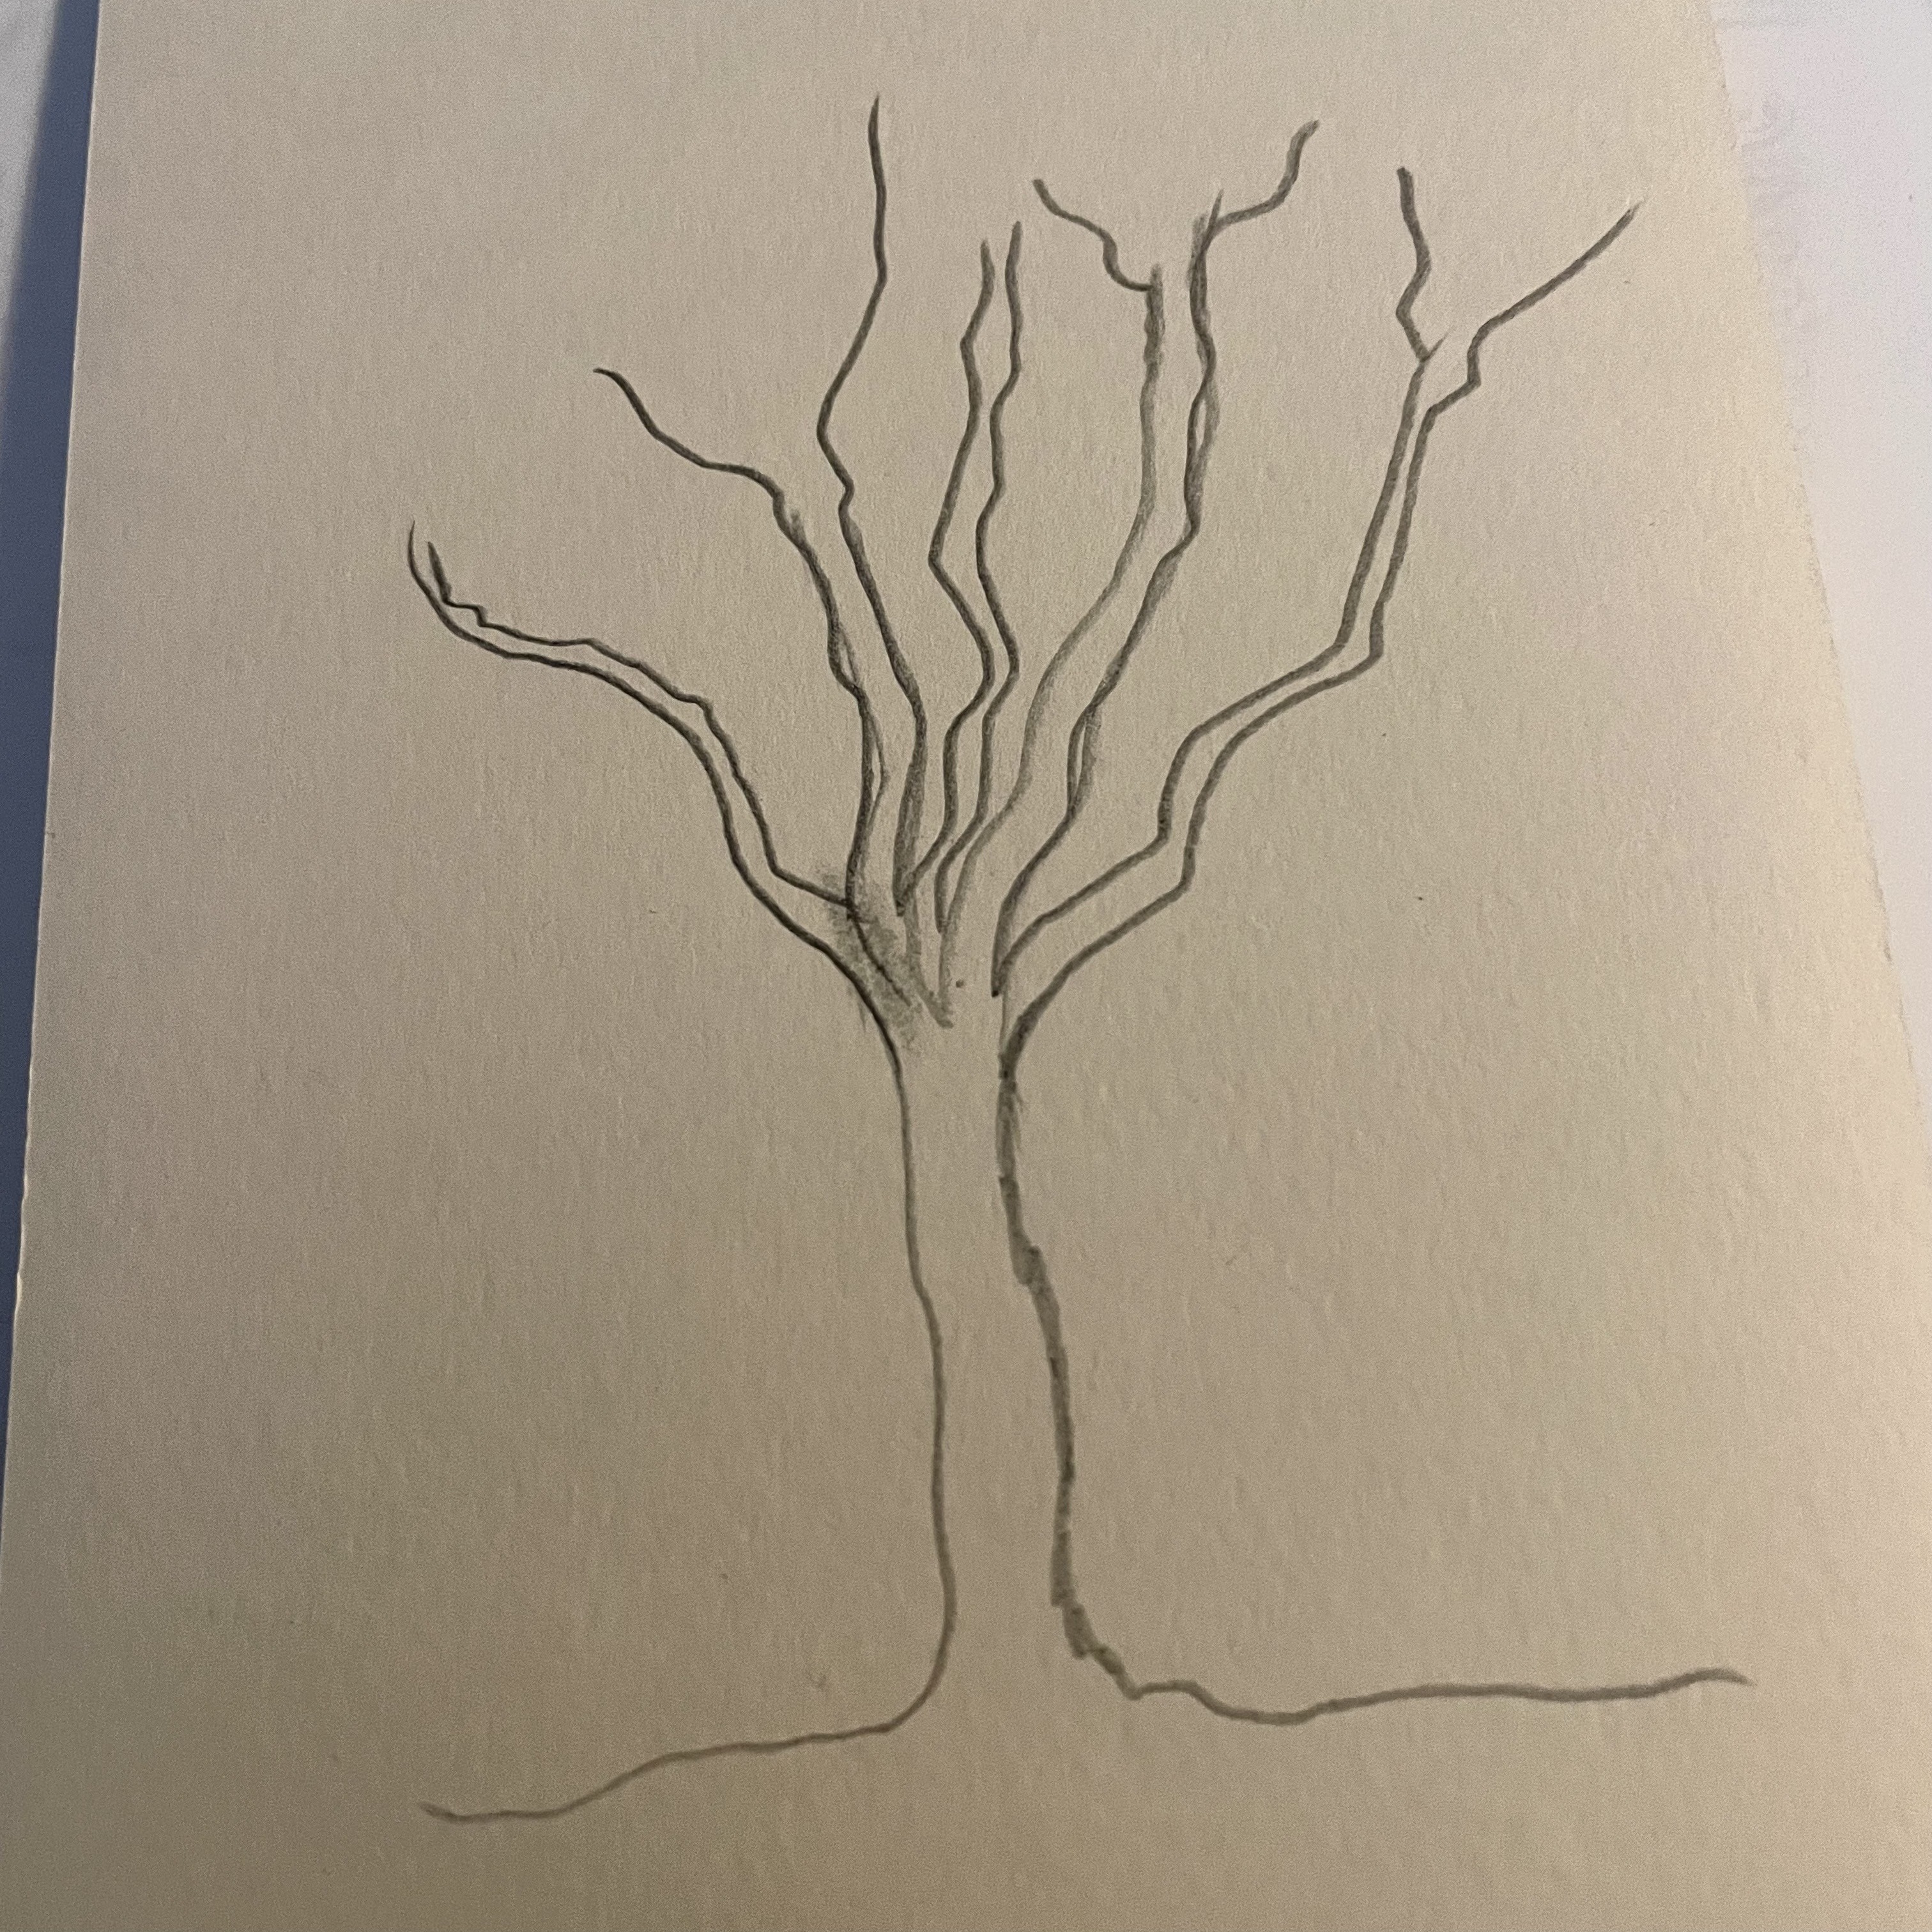 Draw a simple and elegant sketch of a tree with no background. The tree  should have a strong and solid trunk, with branches extending outward in a  balanced and organic manner. The